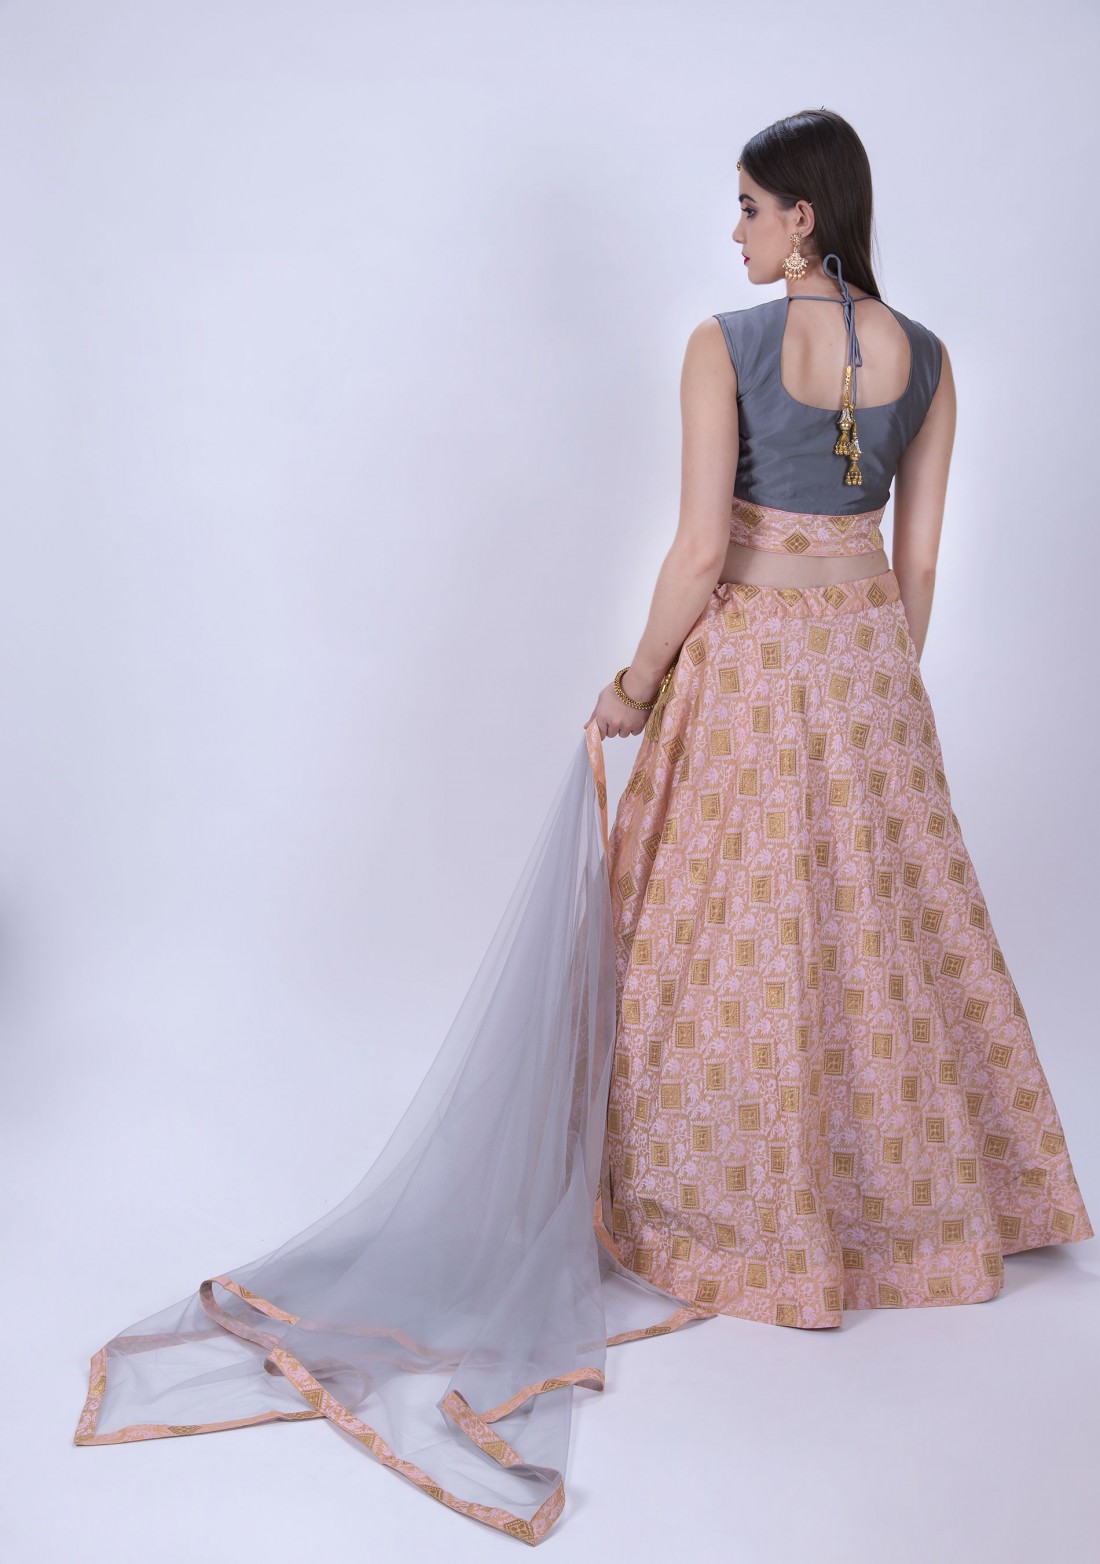 Peach Pink & Grey Colour Circular Skirt Paired With Crop Top And Dupatta